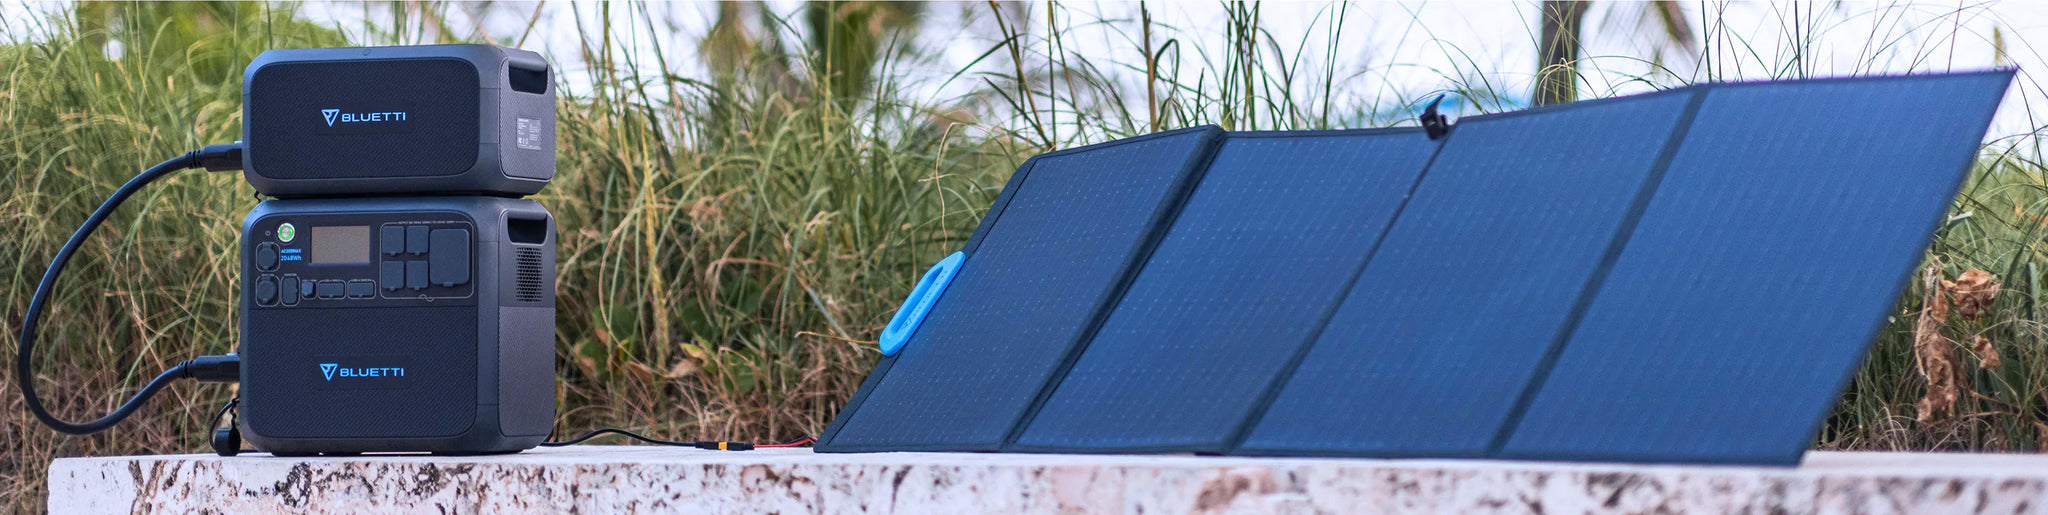 BLUETTI Solar Panel Charging the AC200MAX Portable Power Station + B230 Expansion Battery